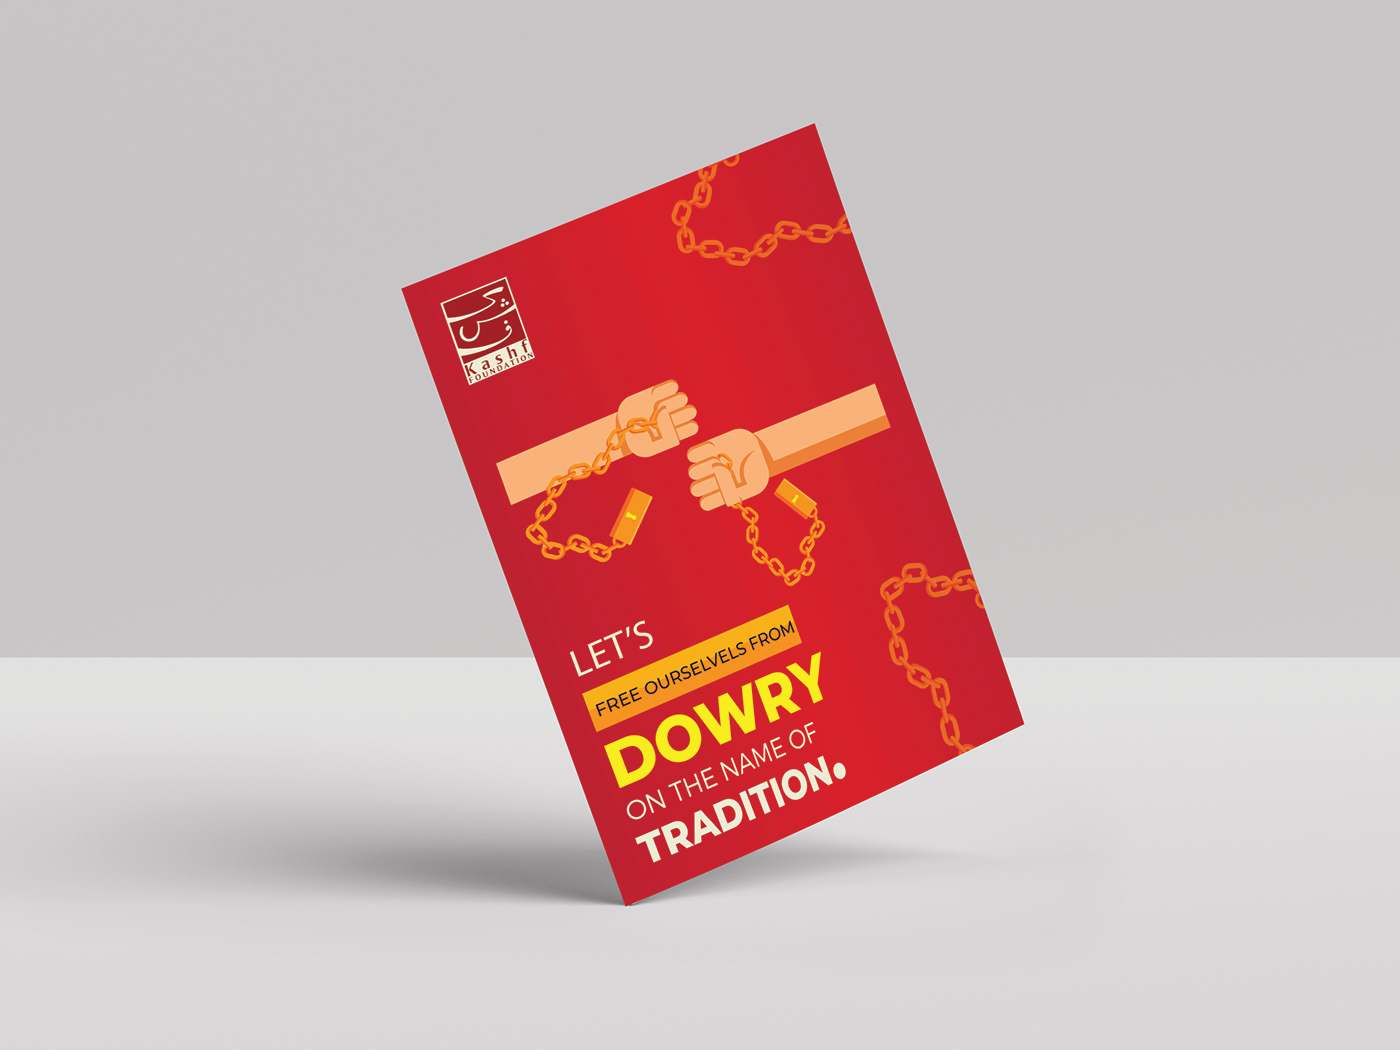 Advertising  campaign dowry graphic Hoarding Magazine design newspaper poster social awareness campaign